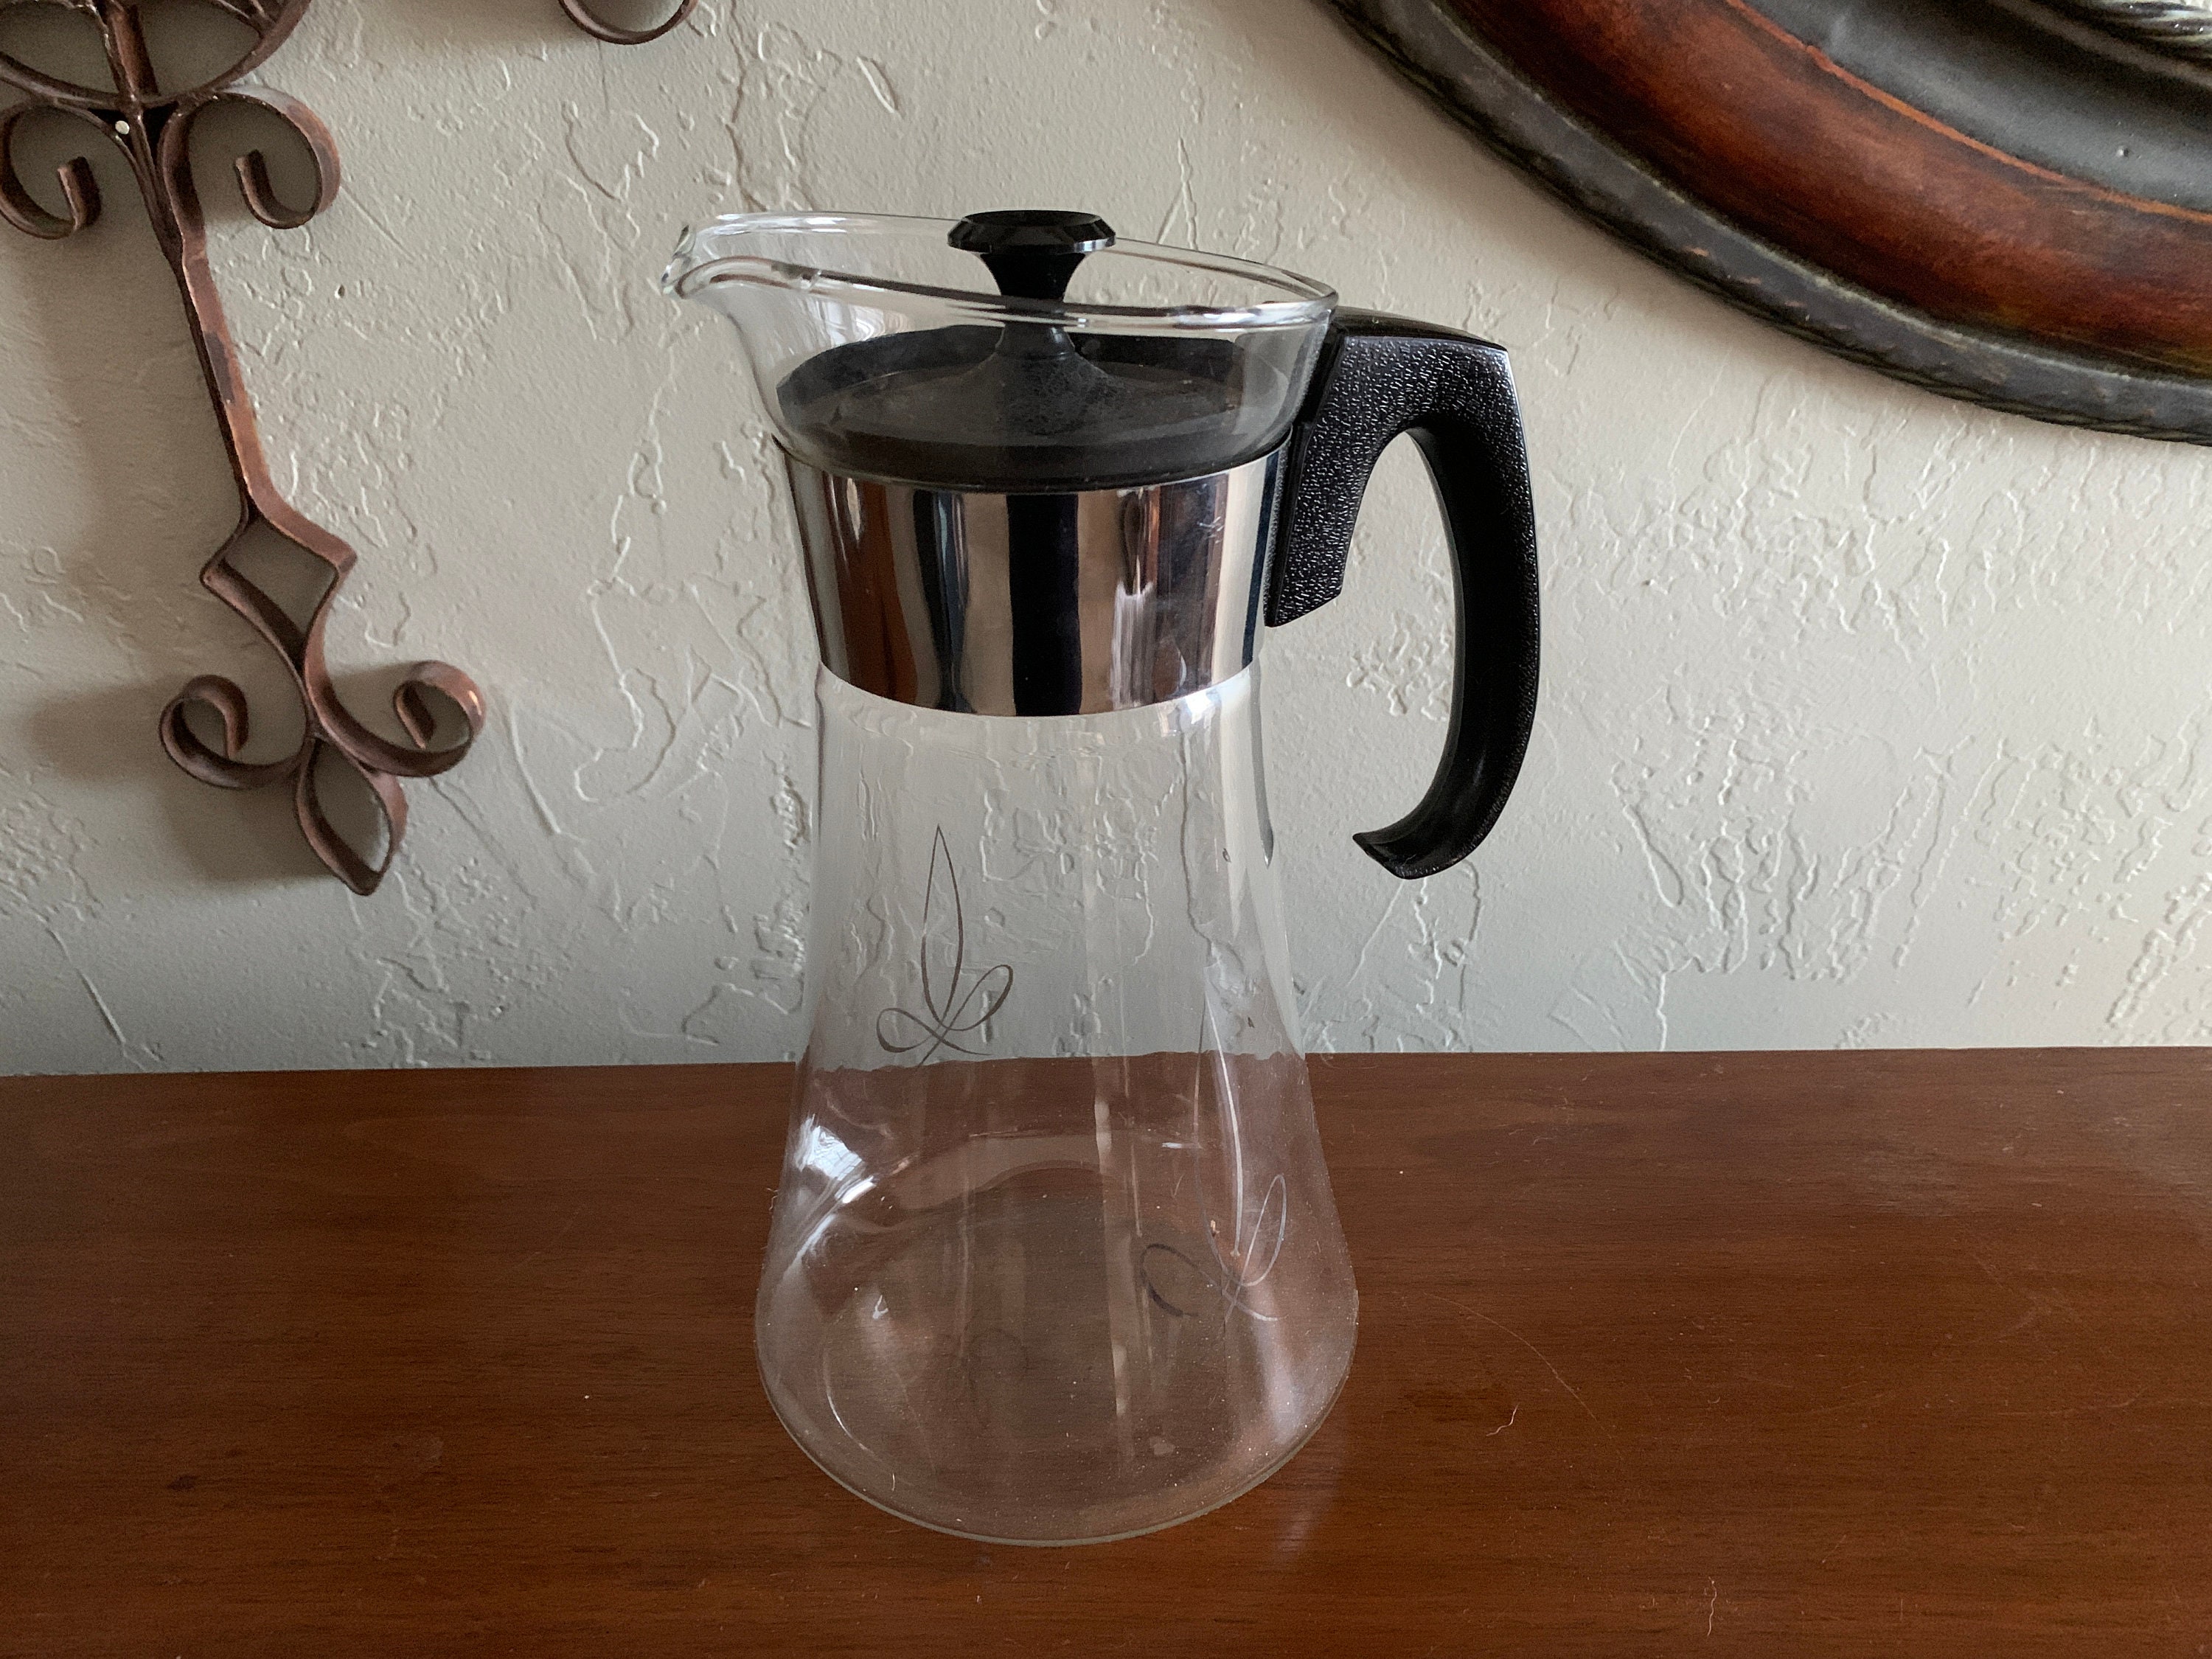 Glass Carafe with Lid #4426.01